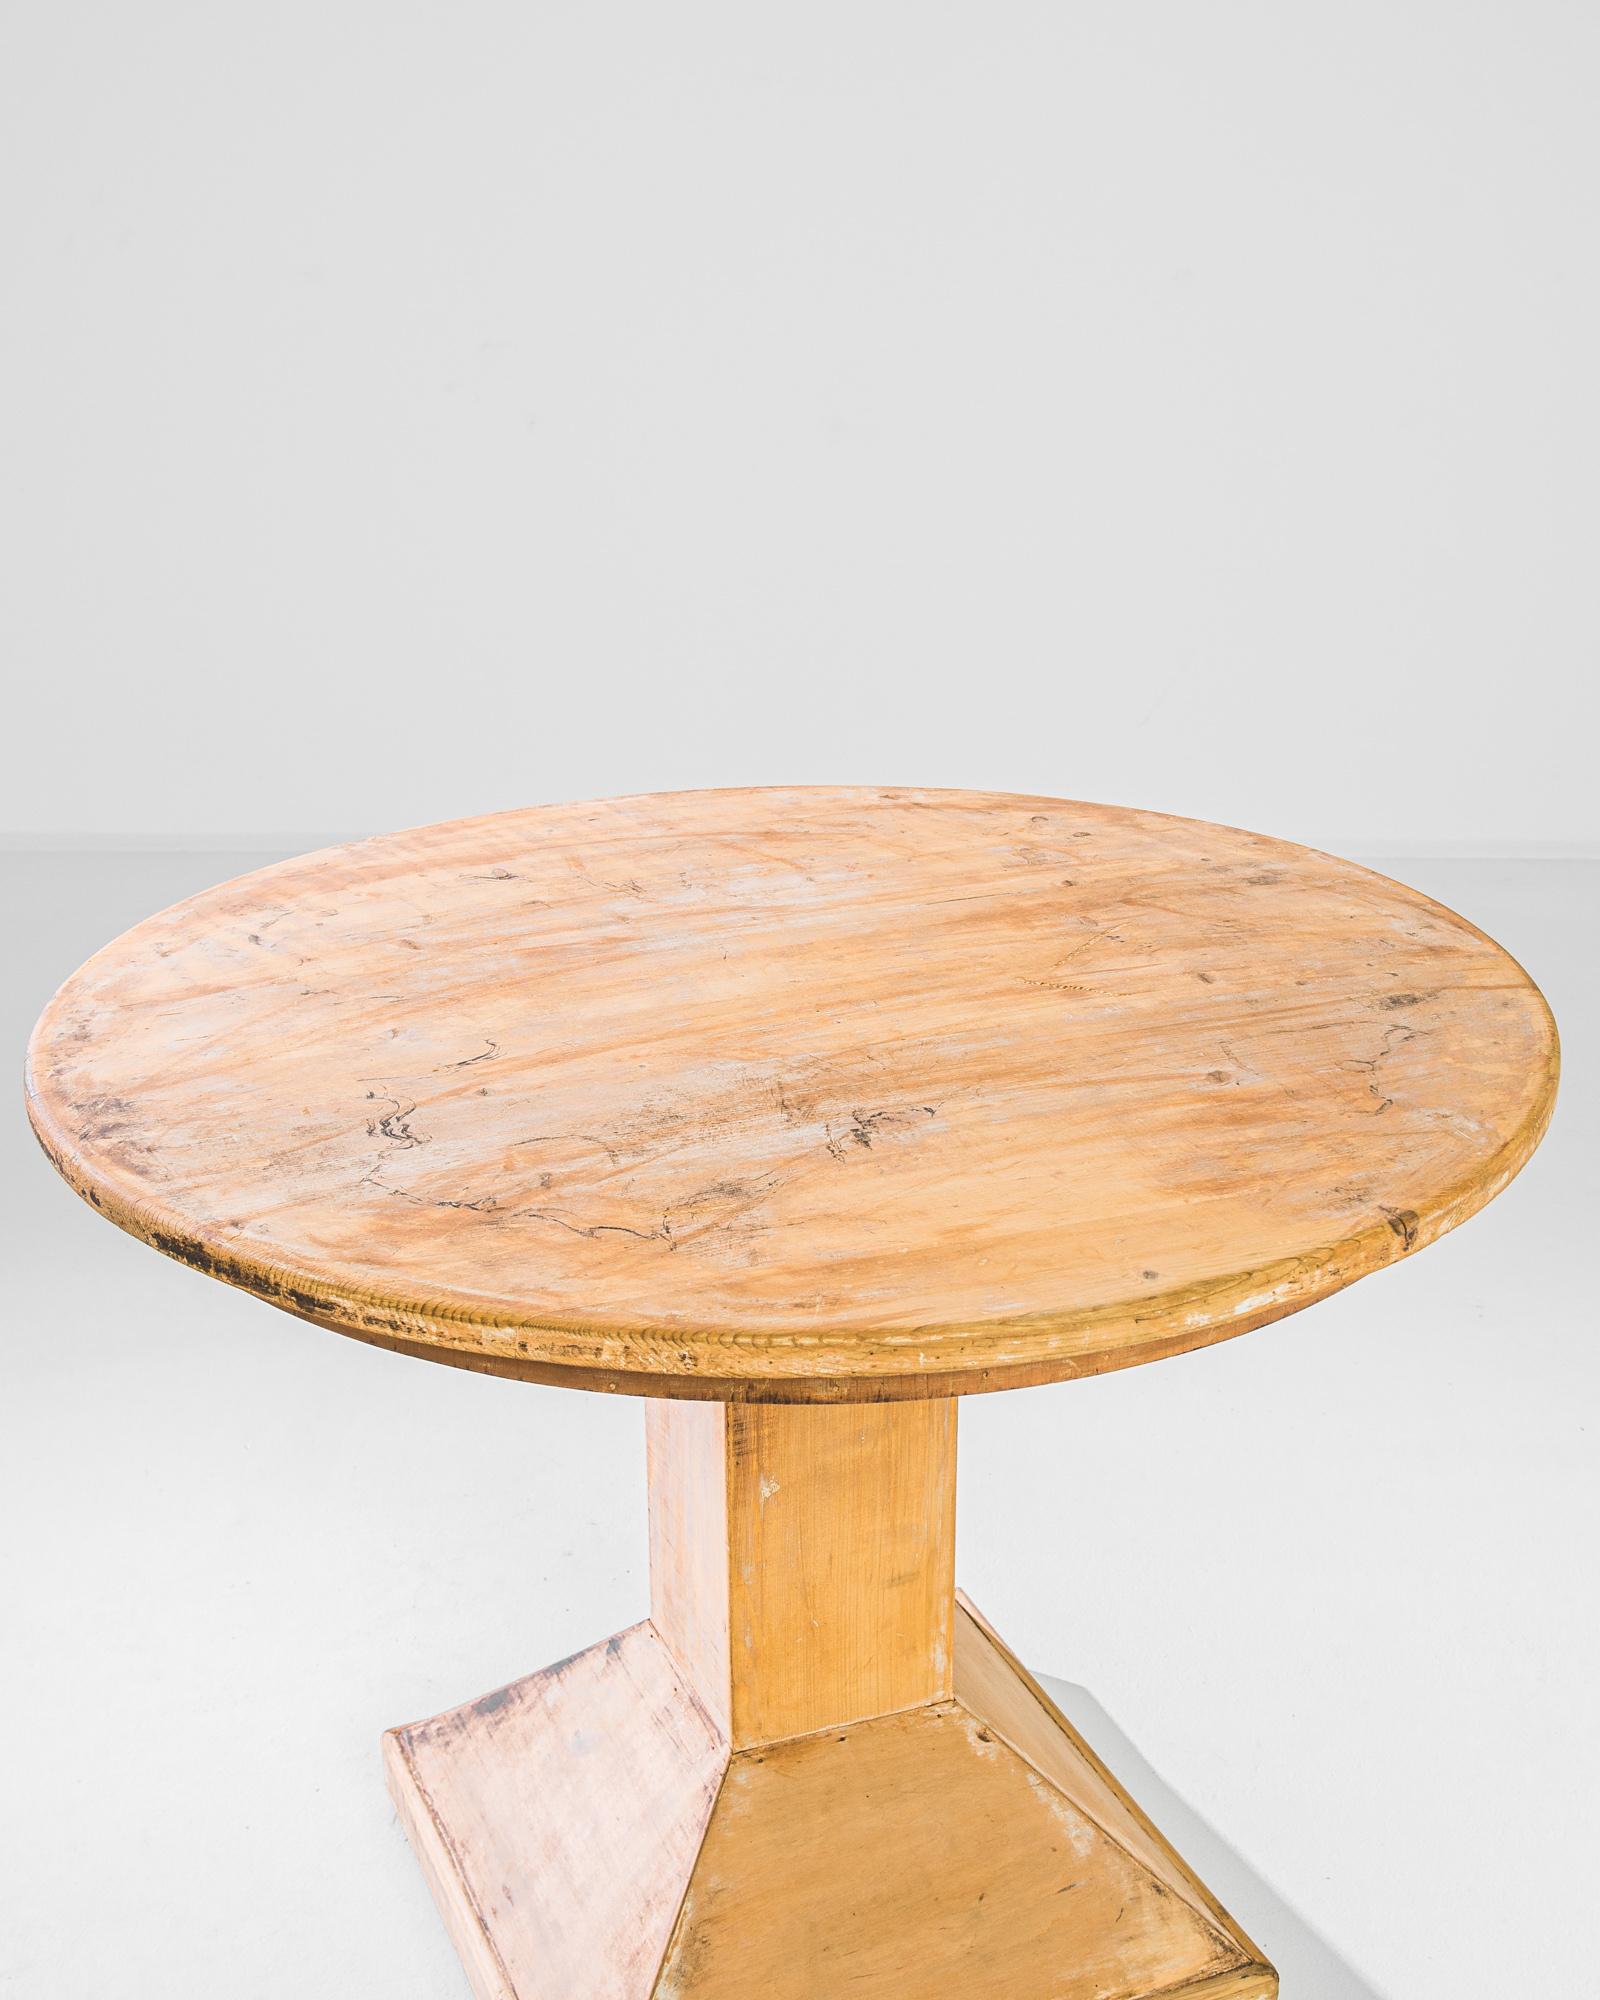 Modern 1940s French Geometric Wooden Table